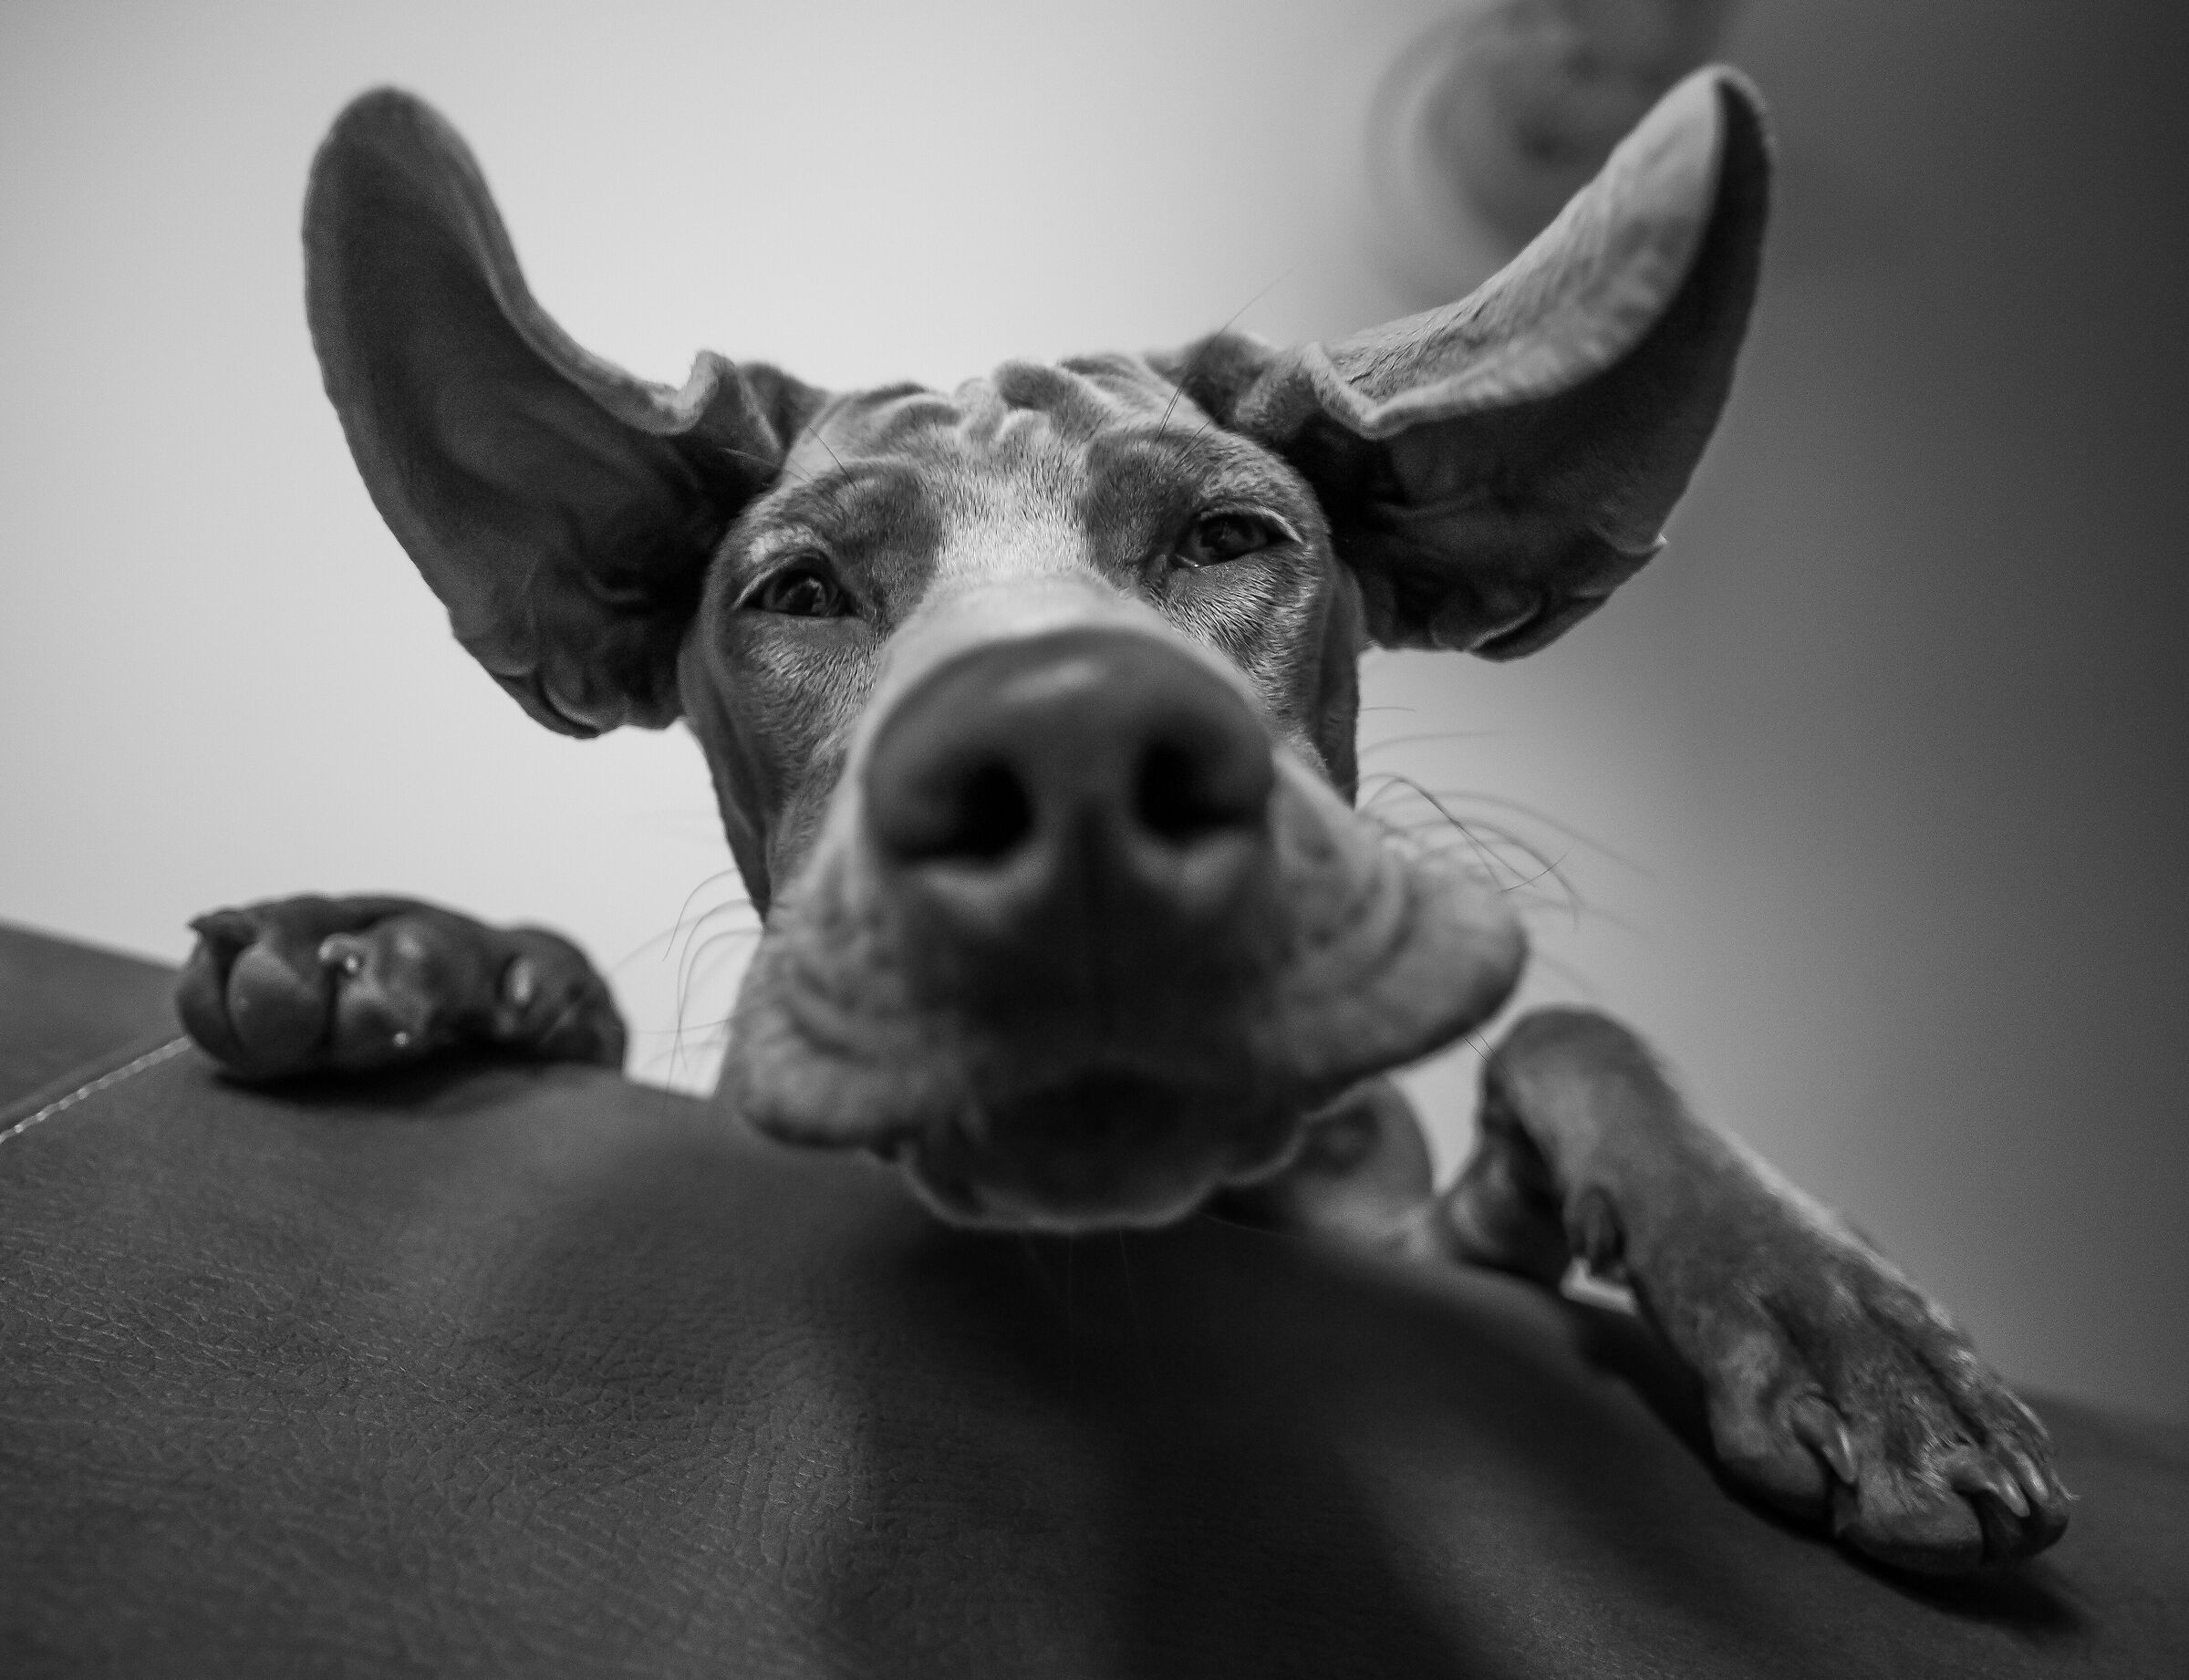 The Weimaraner in black and white...